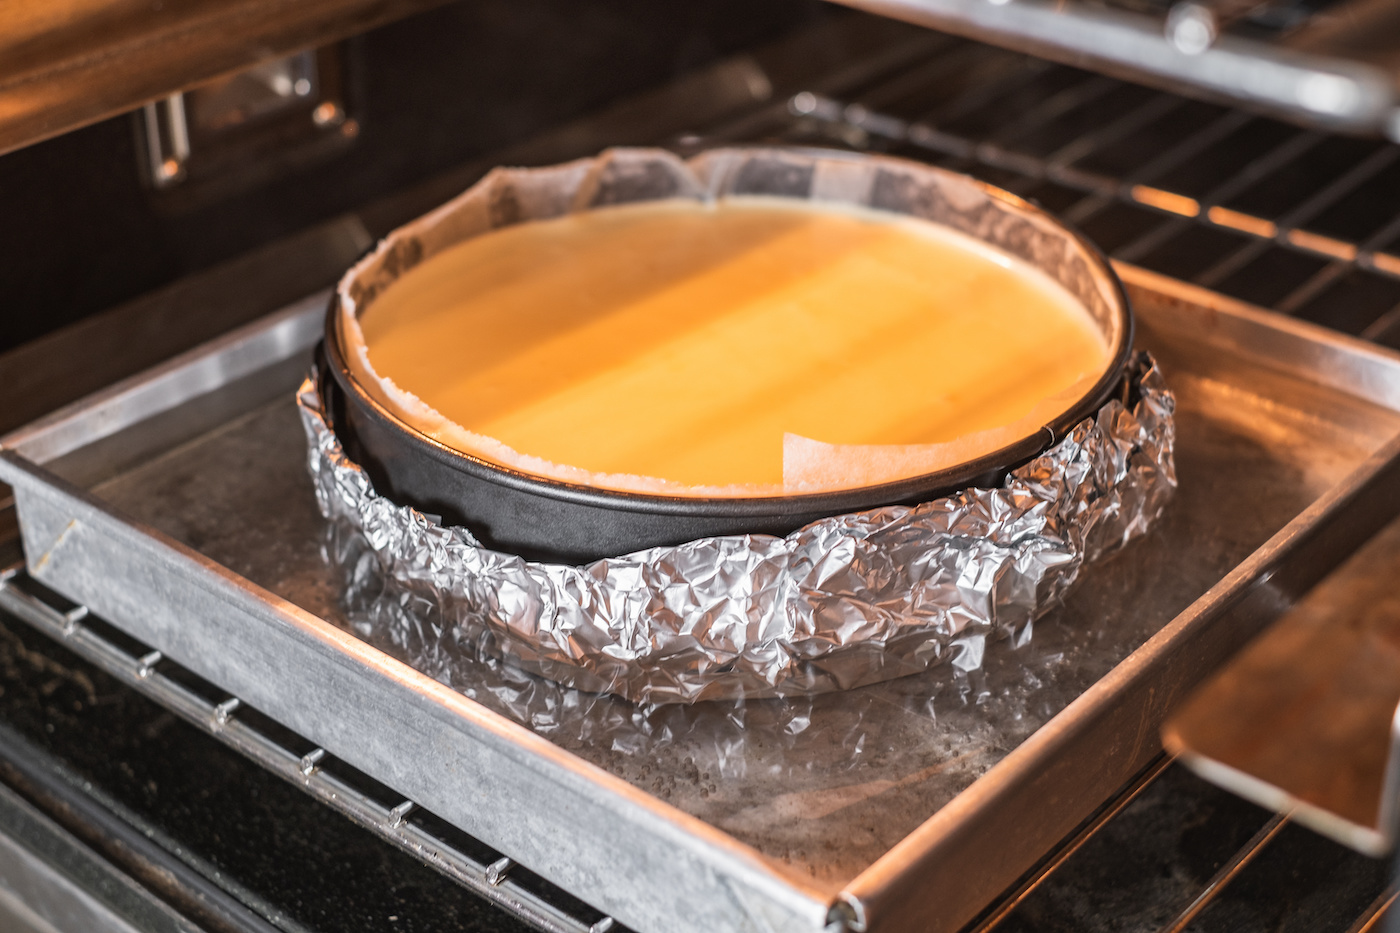 Baking-cheesecake-in-the-oven-in-a-water-bath